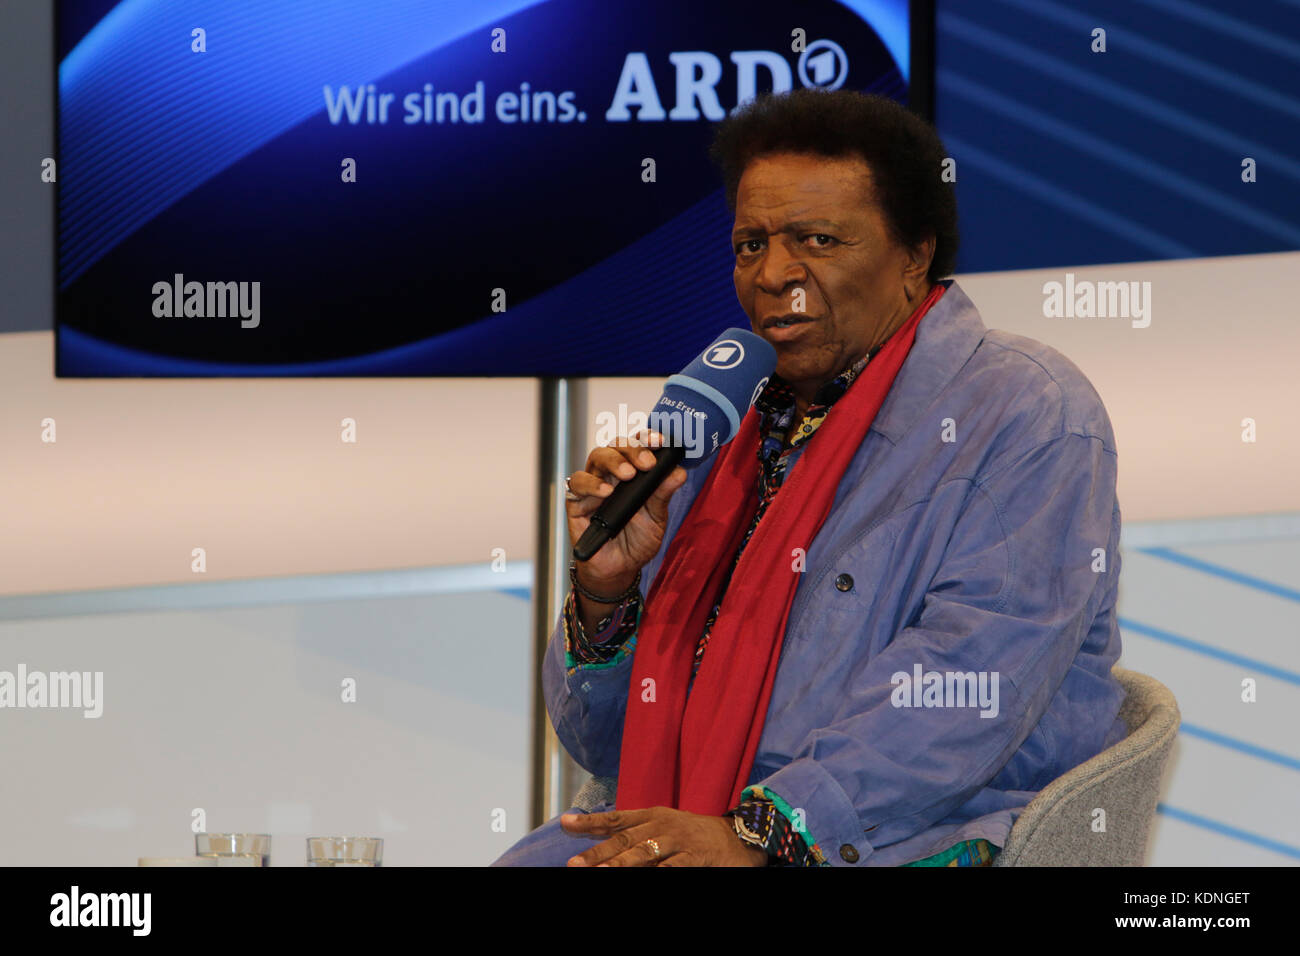 Frankfurt, Germany. 14th Oct, 2017. German Schlager singer Roberto Blanco gives an interview at the German public broadcaster ARD at the Frankfurt Book Fair. The Frankfurt Book Fair 2017 is the world largest book fair with over 7,000 exhibitors and over 250,000 expected visitors. It is open from the 11th to the 15th October with the last two days being open to the general public. Credit: Michael Debets/Pacific Press/Alamy Live News Stock Photo